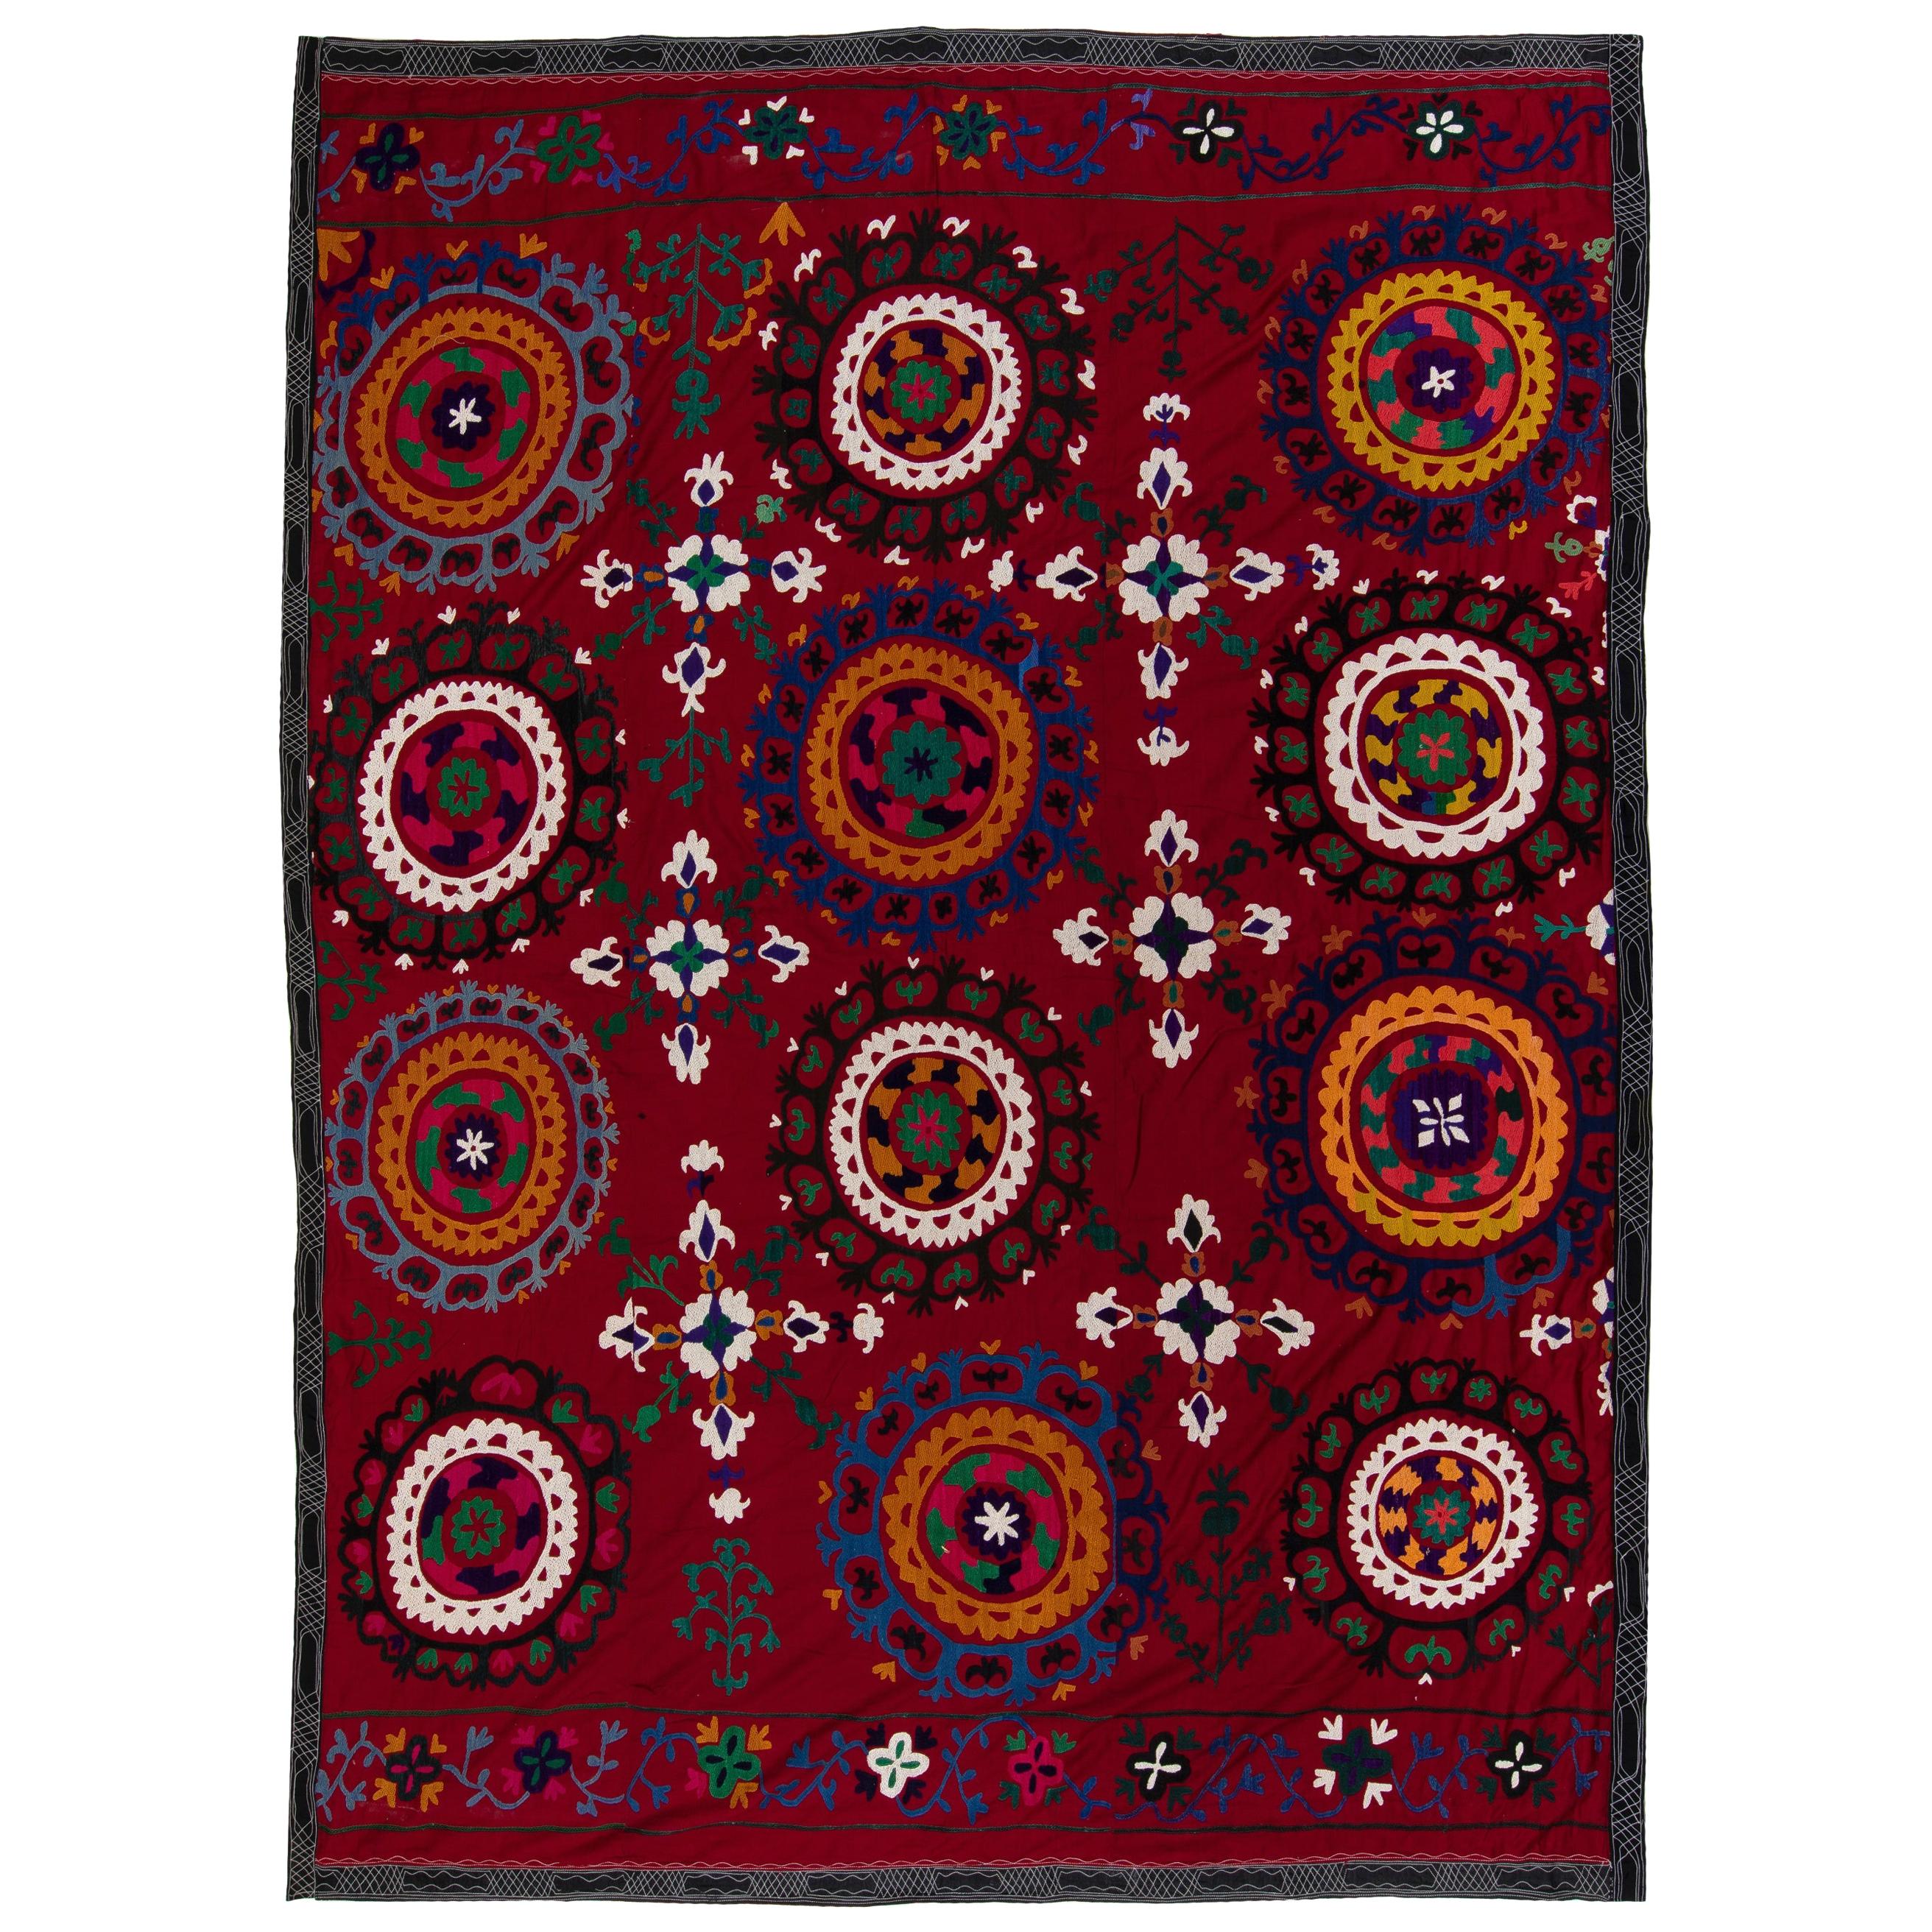 6.4x8.4 Ft Central Asian Suzani Textile, Embroidered Cotton & Silk Wall Hanging